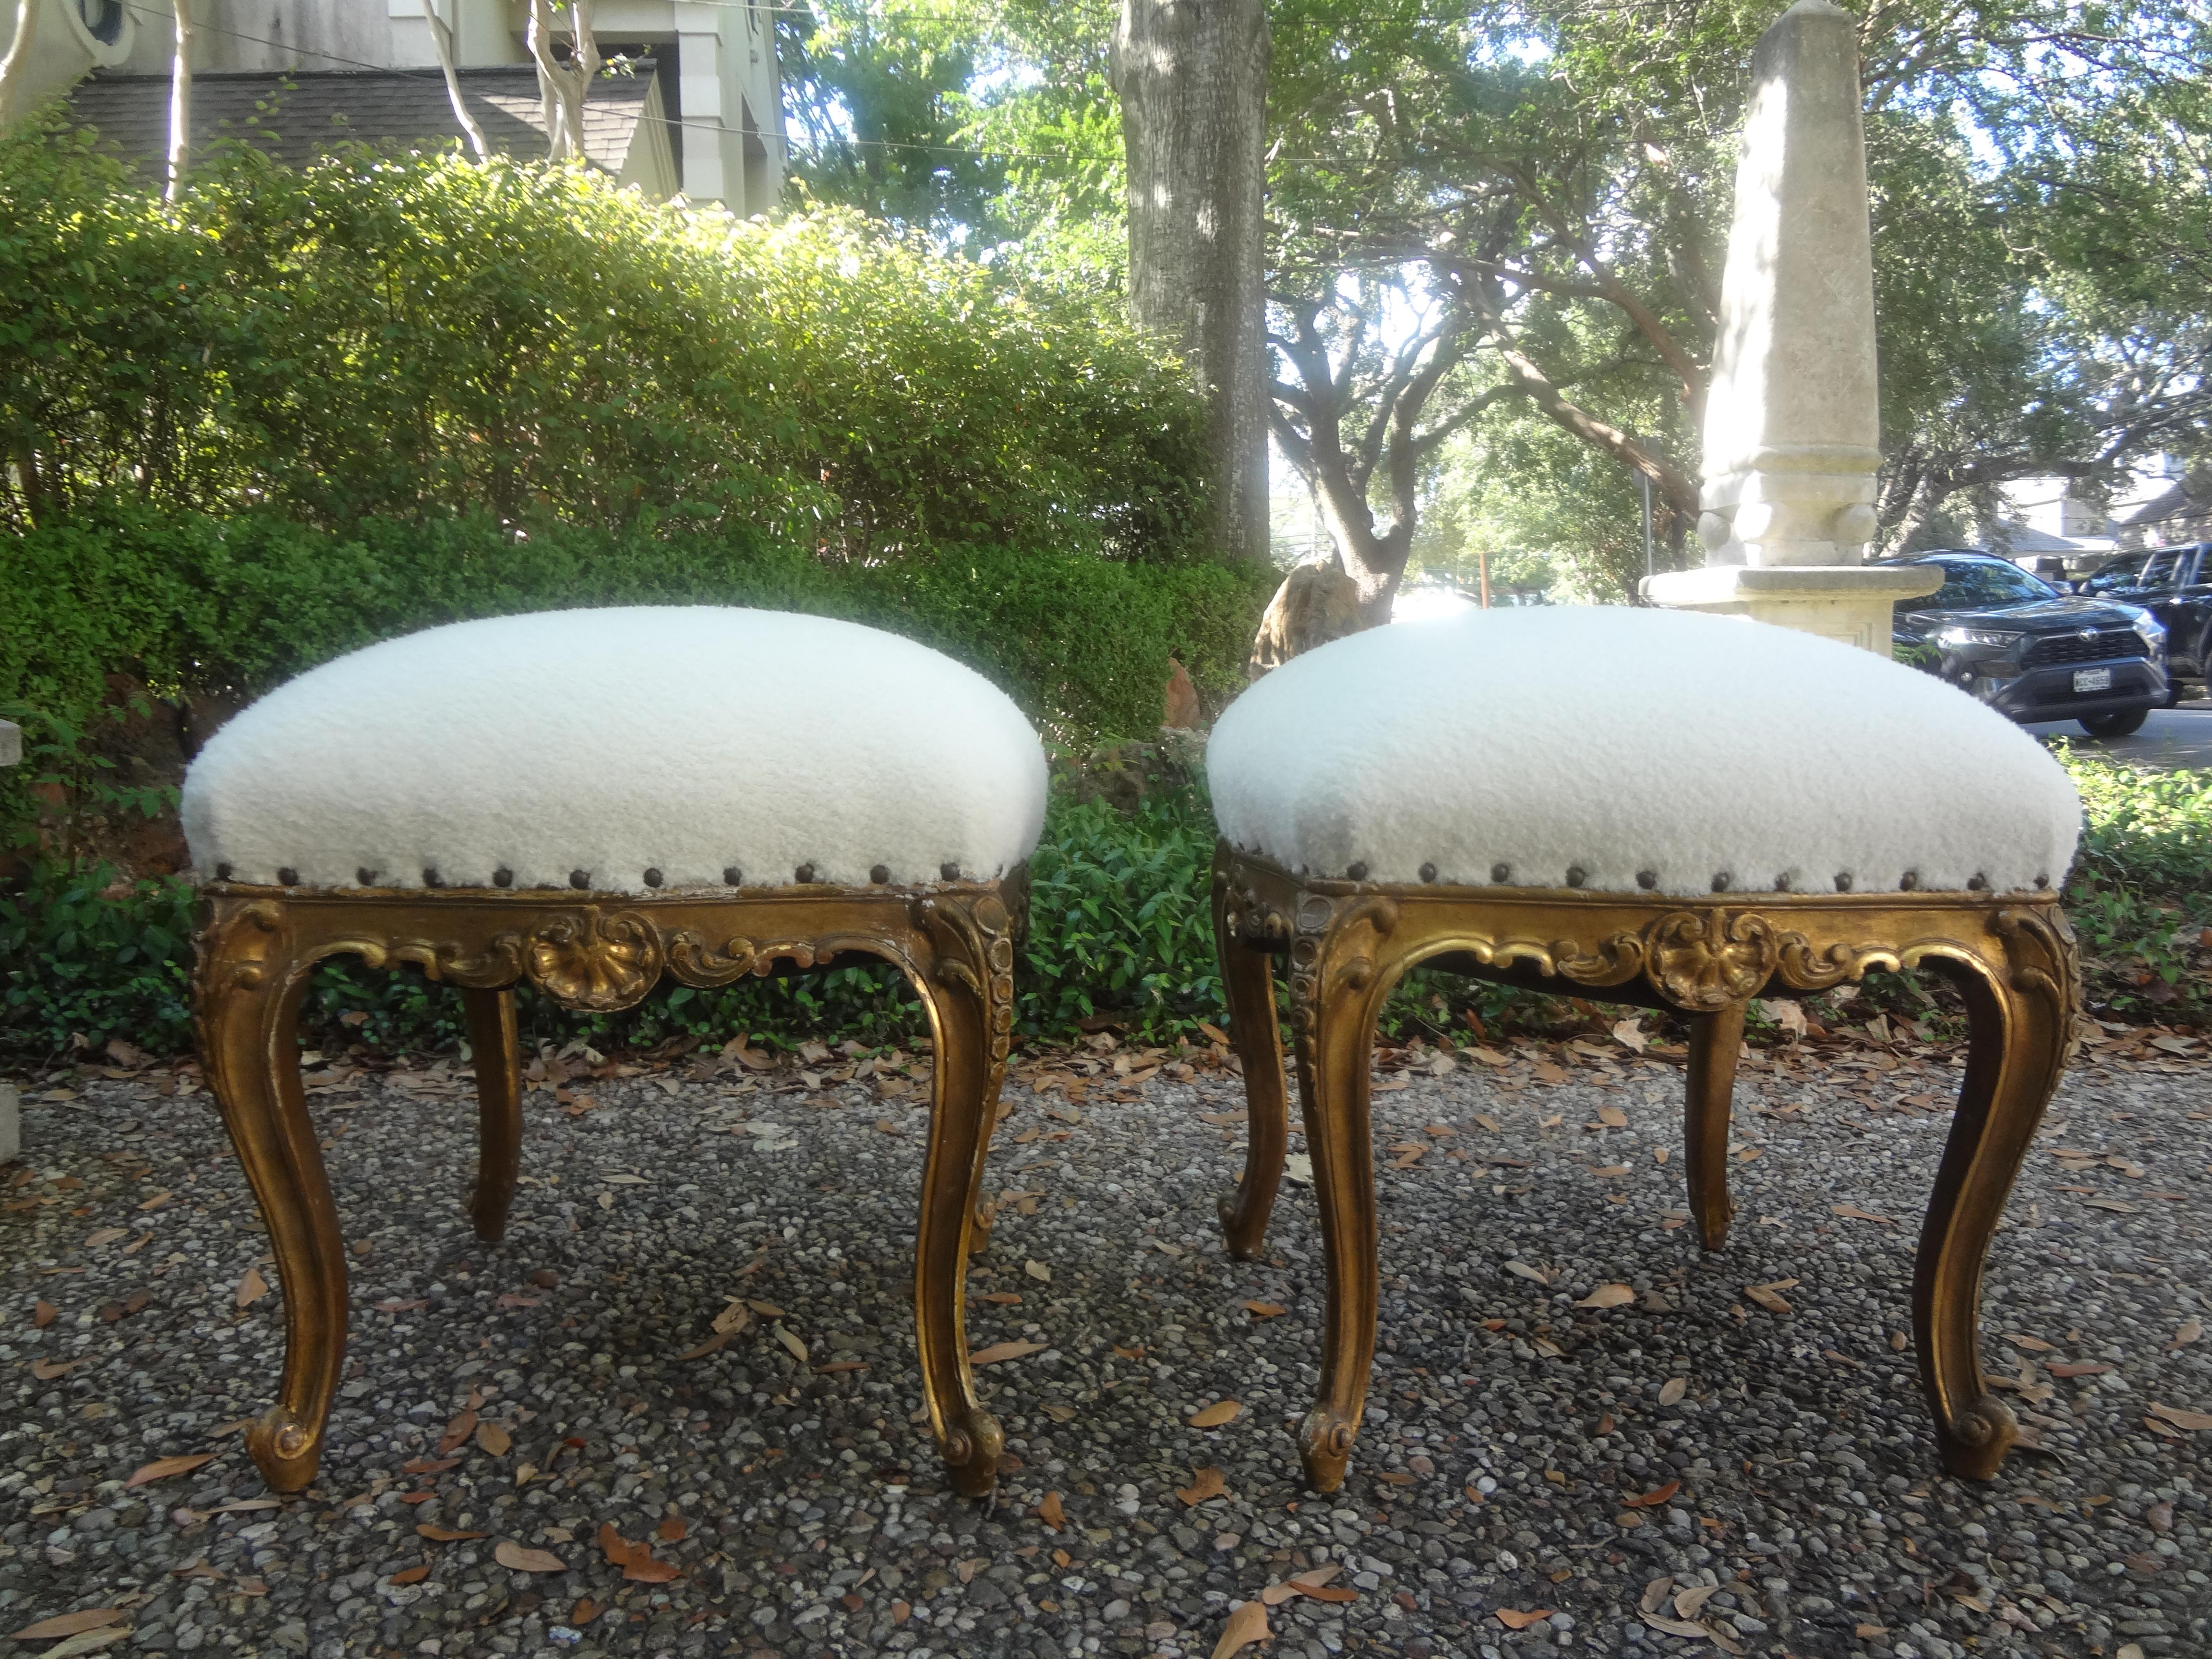 Pair of 19th Century French Regence Style Giltwood Ottomans Or Benches.
This lovely pair of antique French gilt wood ottomans, benches, stools or poufs and a good size and have been professionally upholstered in a plush nubby cream wool